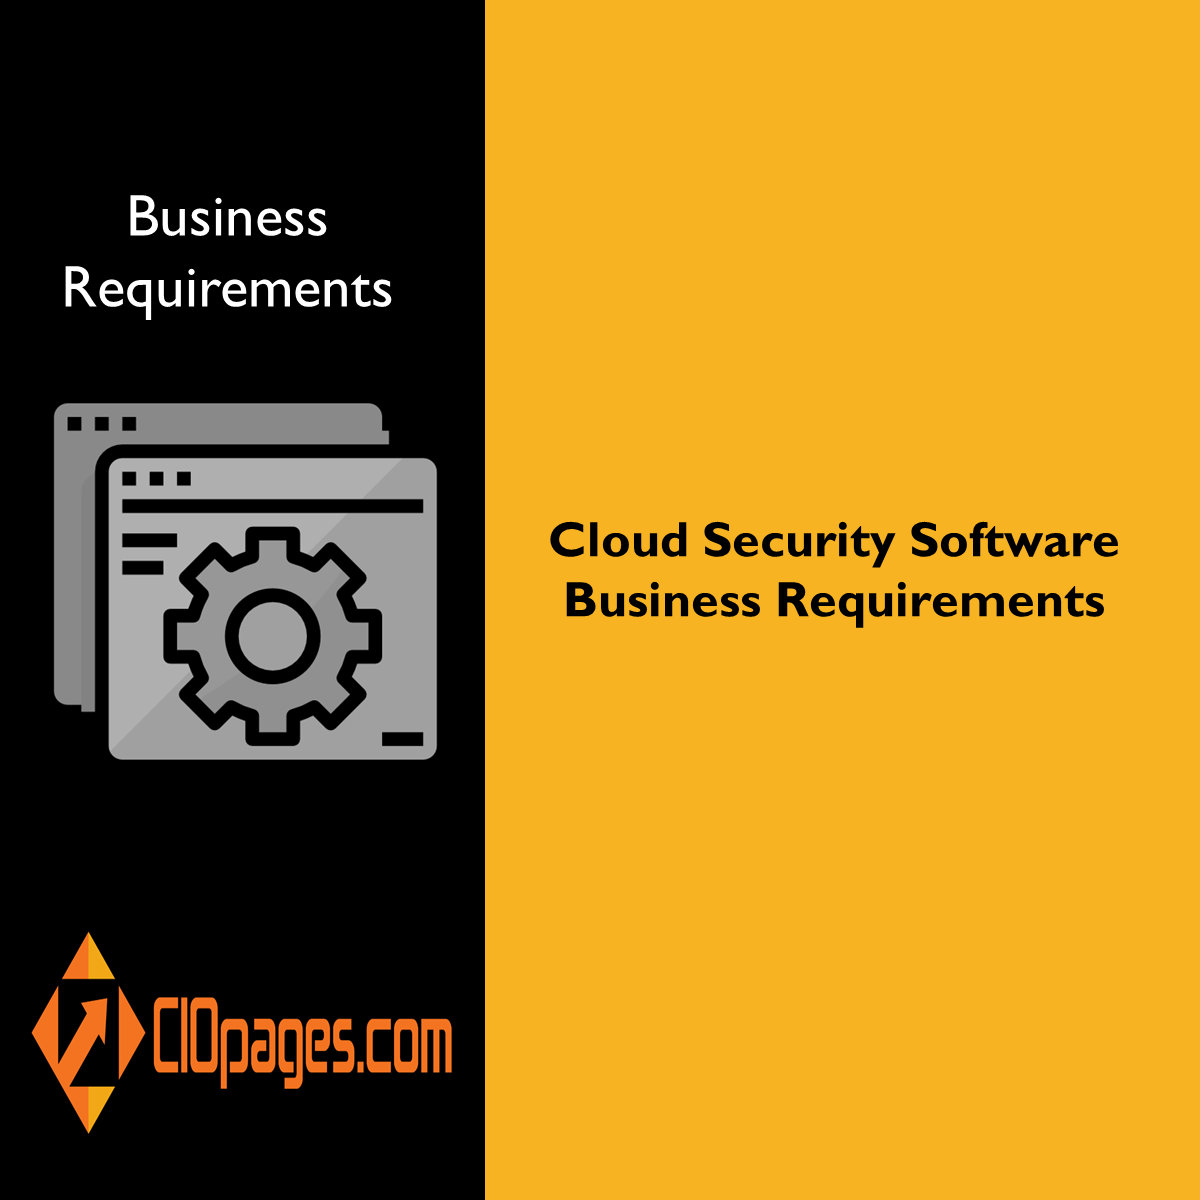 Cloud Security Software Business Requirements